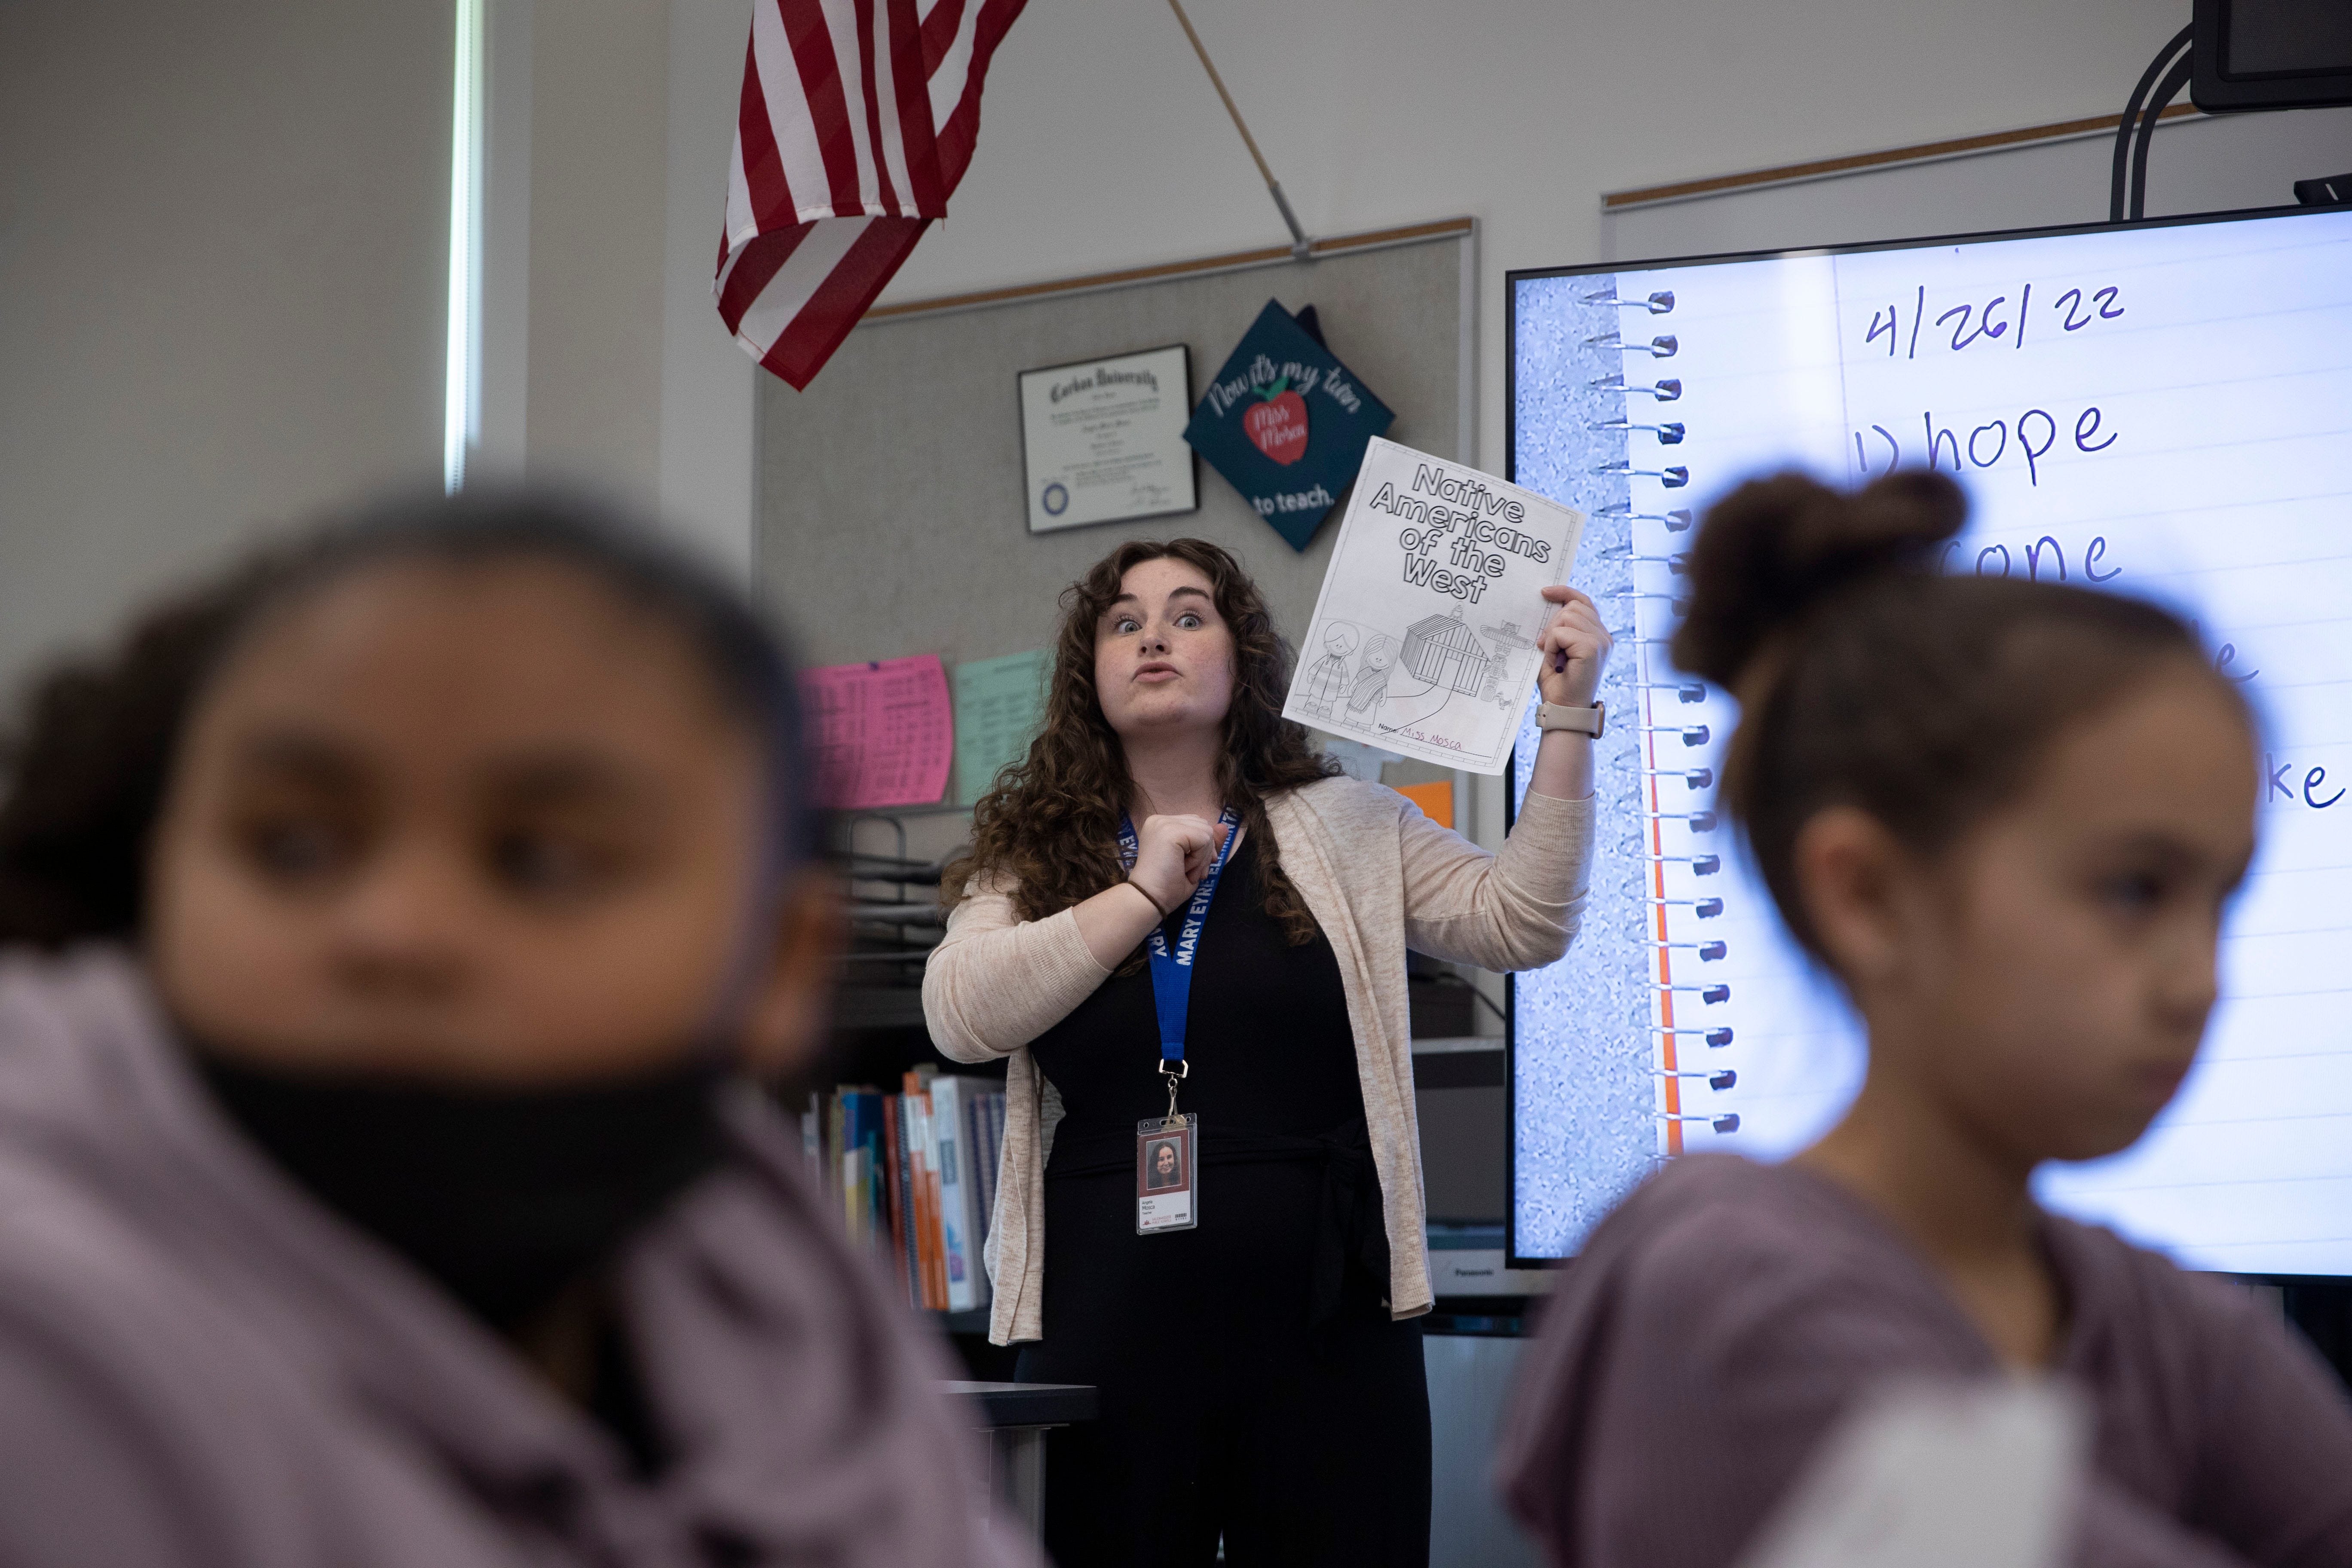 Angela Mosca instructs students to get out a reading guide during a reading skills lesson at Mary Eyre Elementary School in Salem in April.